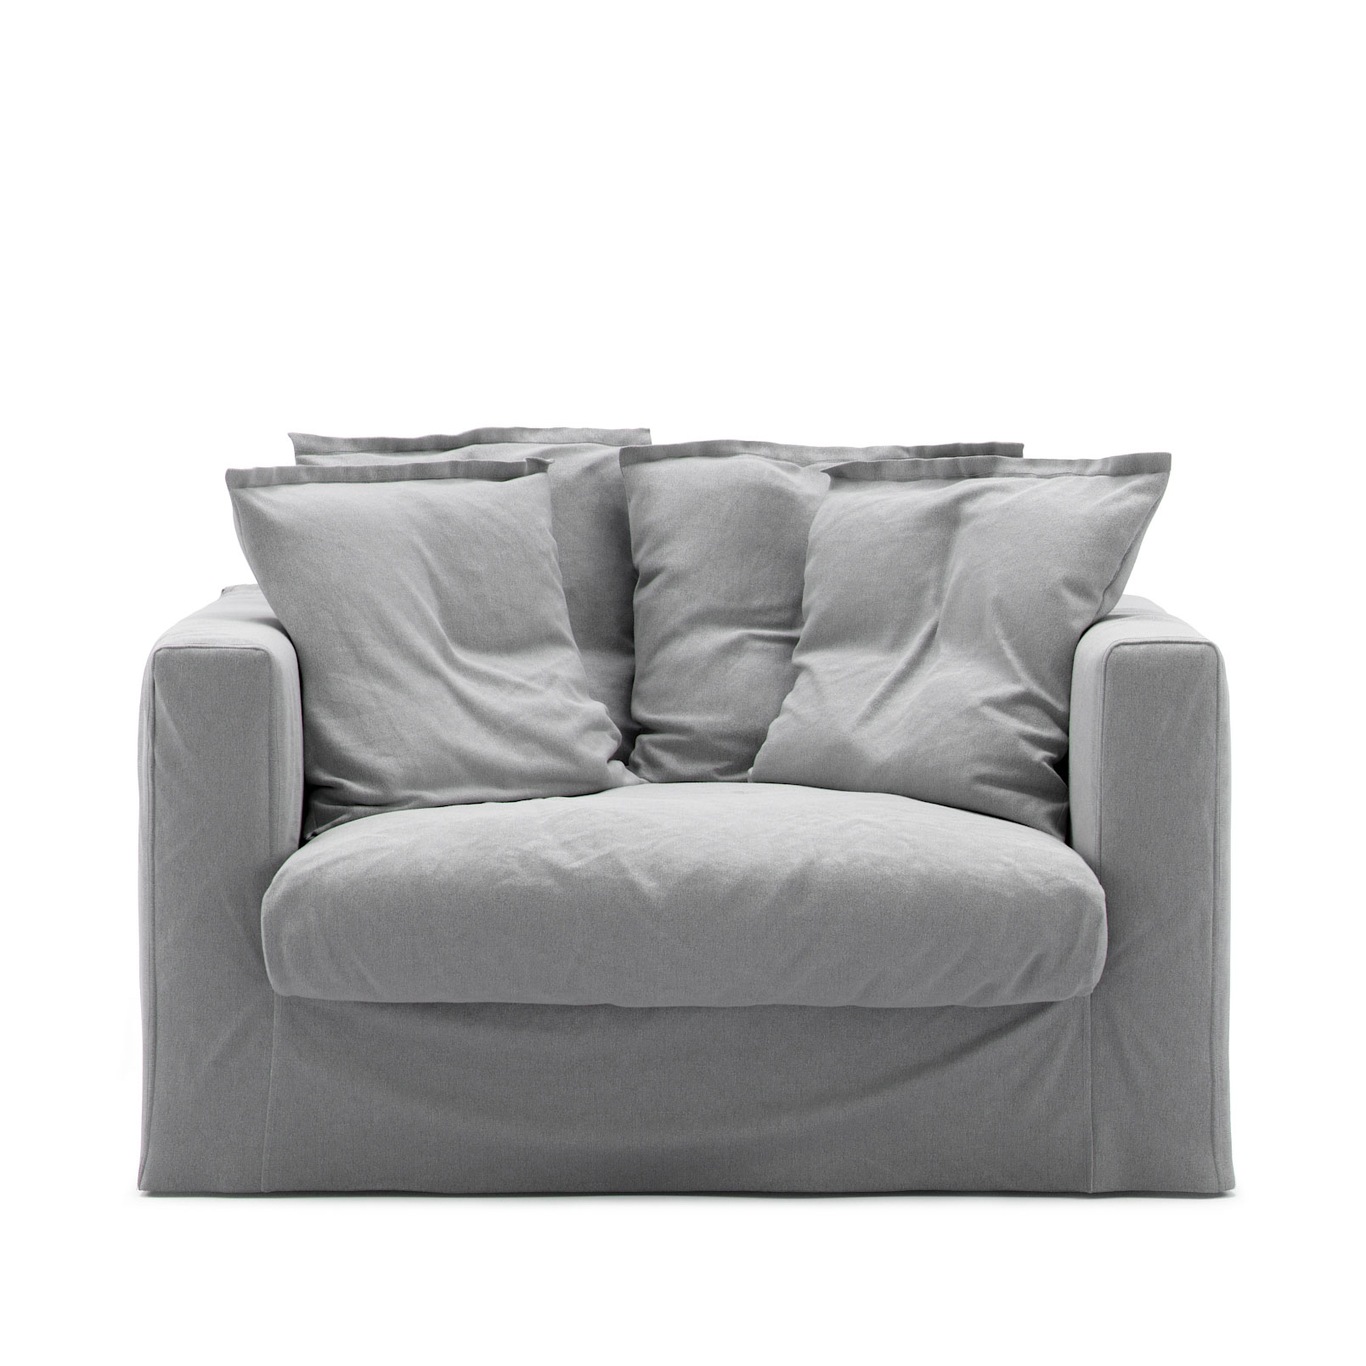 Le Grand Air Loveseat Upholstery Cotton, Light Grey